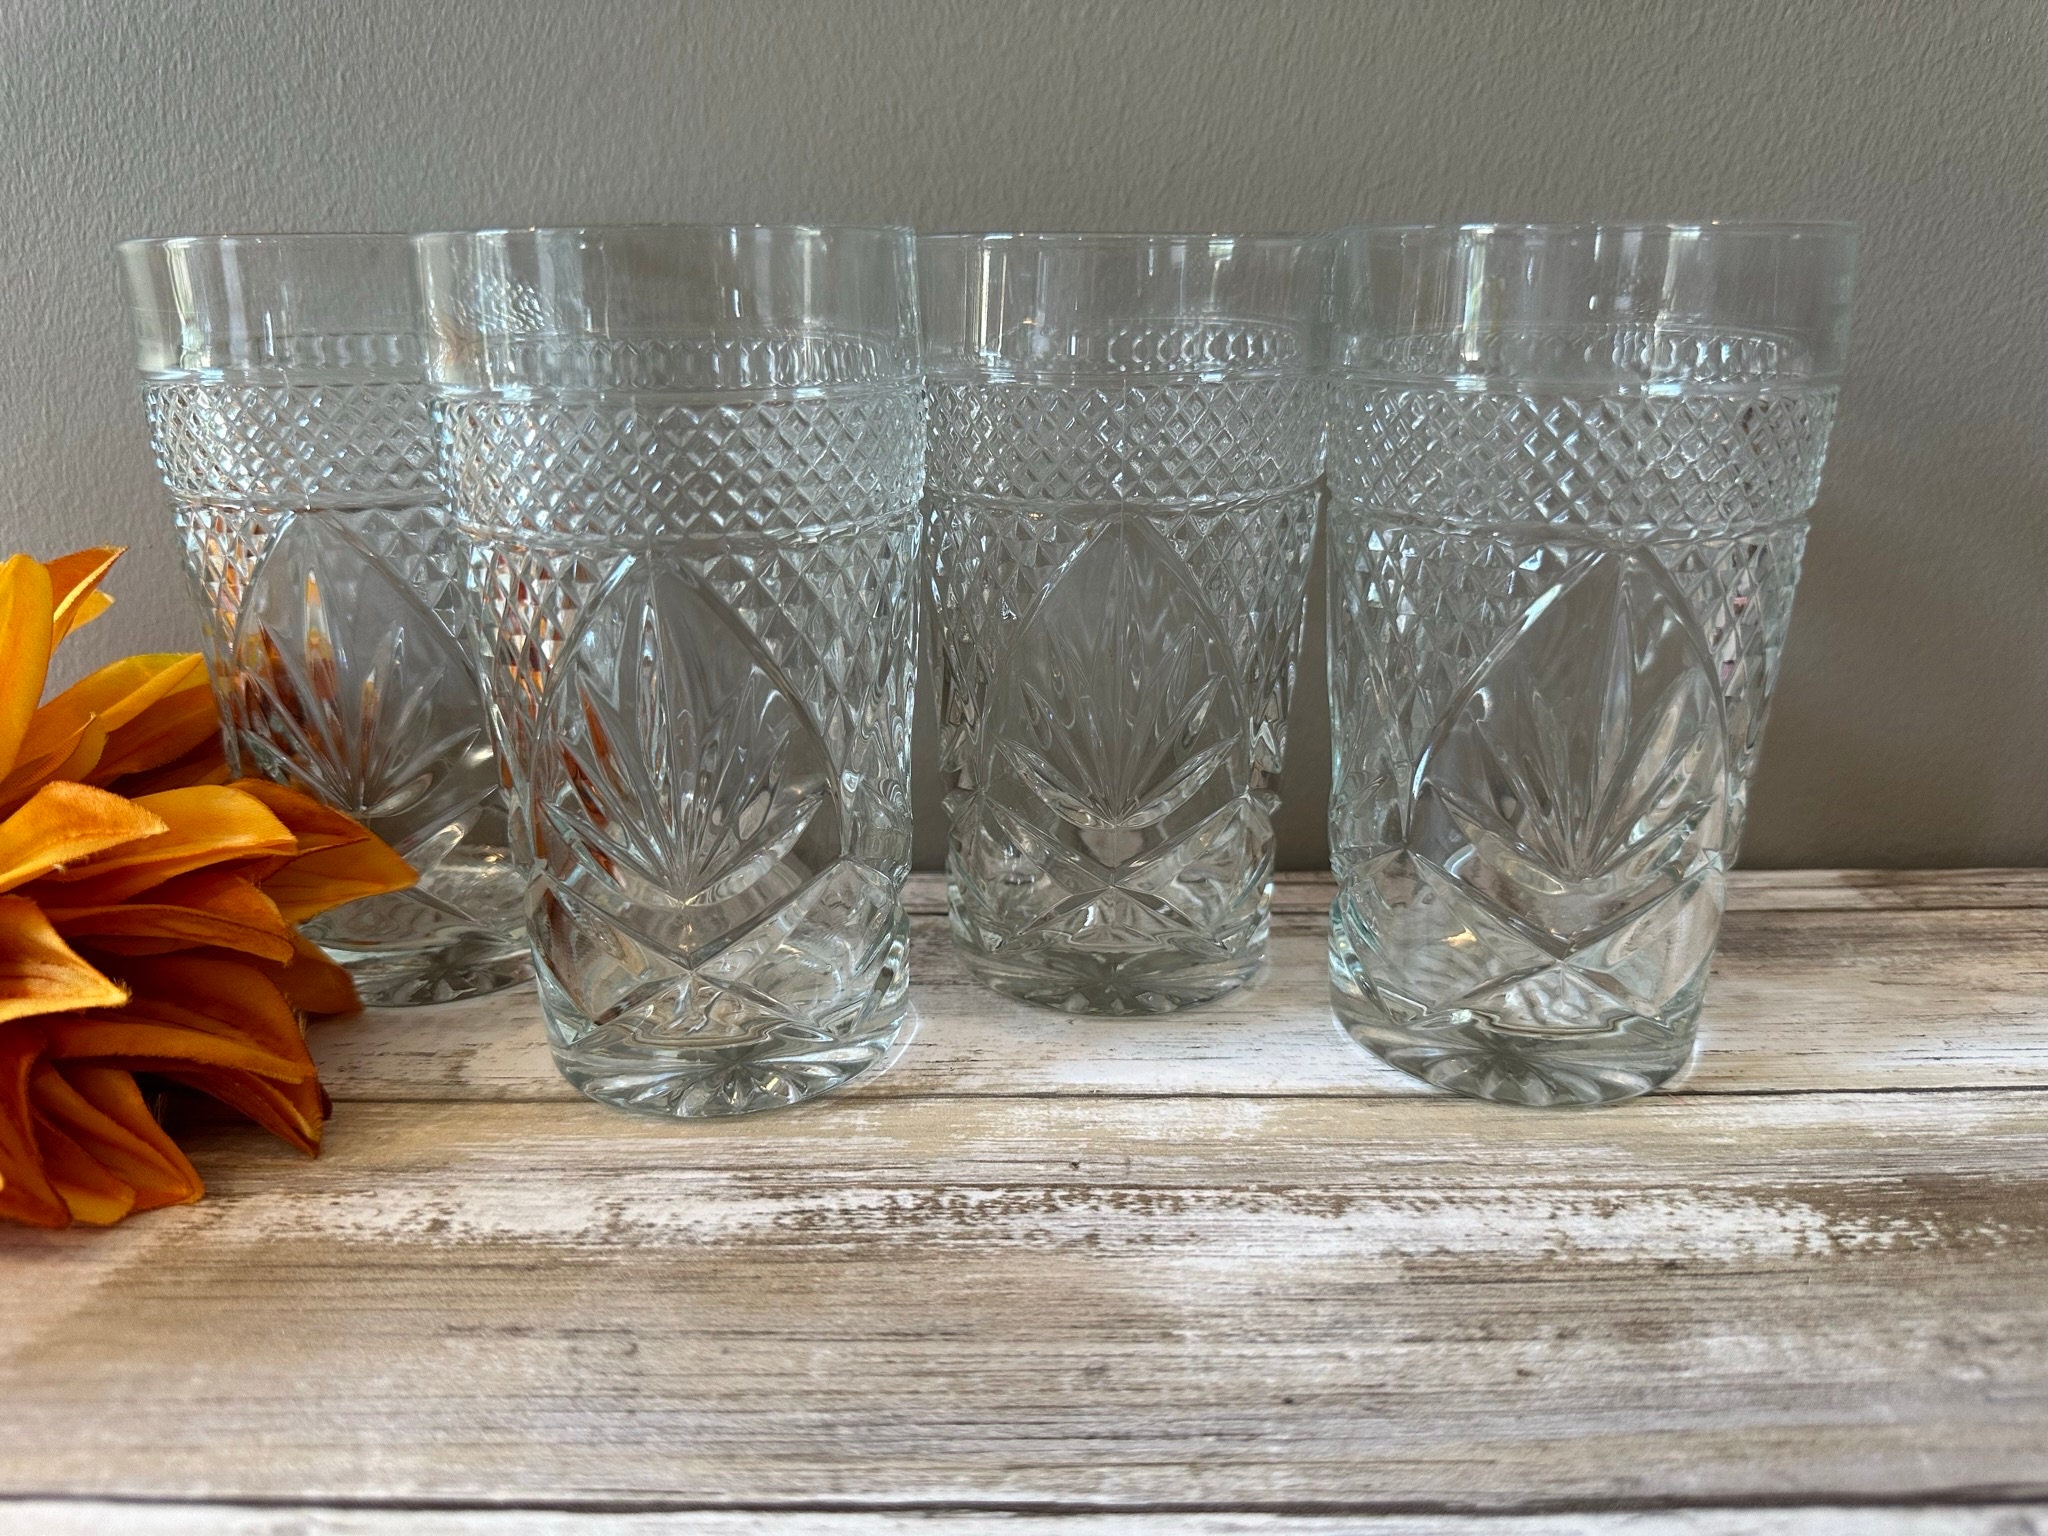 Uiifan Set of 12 Tall Highball Glasses 12 oz Crystal Drinking Glasses Clear  Fancy Glass Cups Vintage…See more Uiifan Set of 12 Tall Highball Glasses